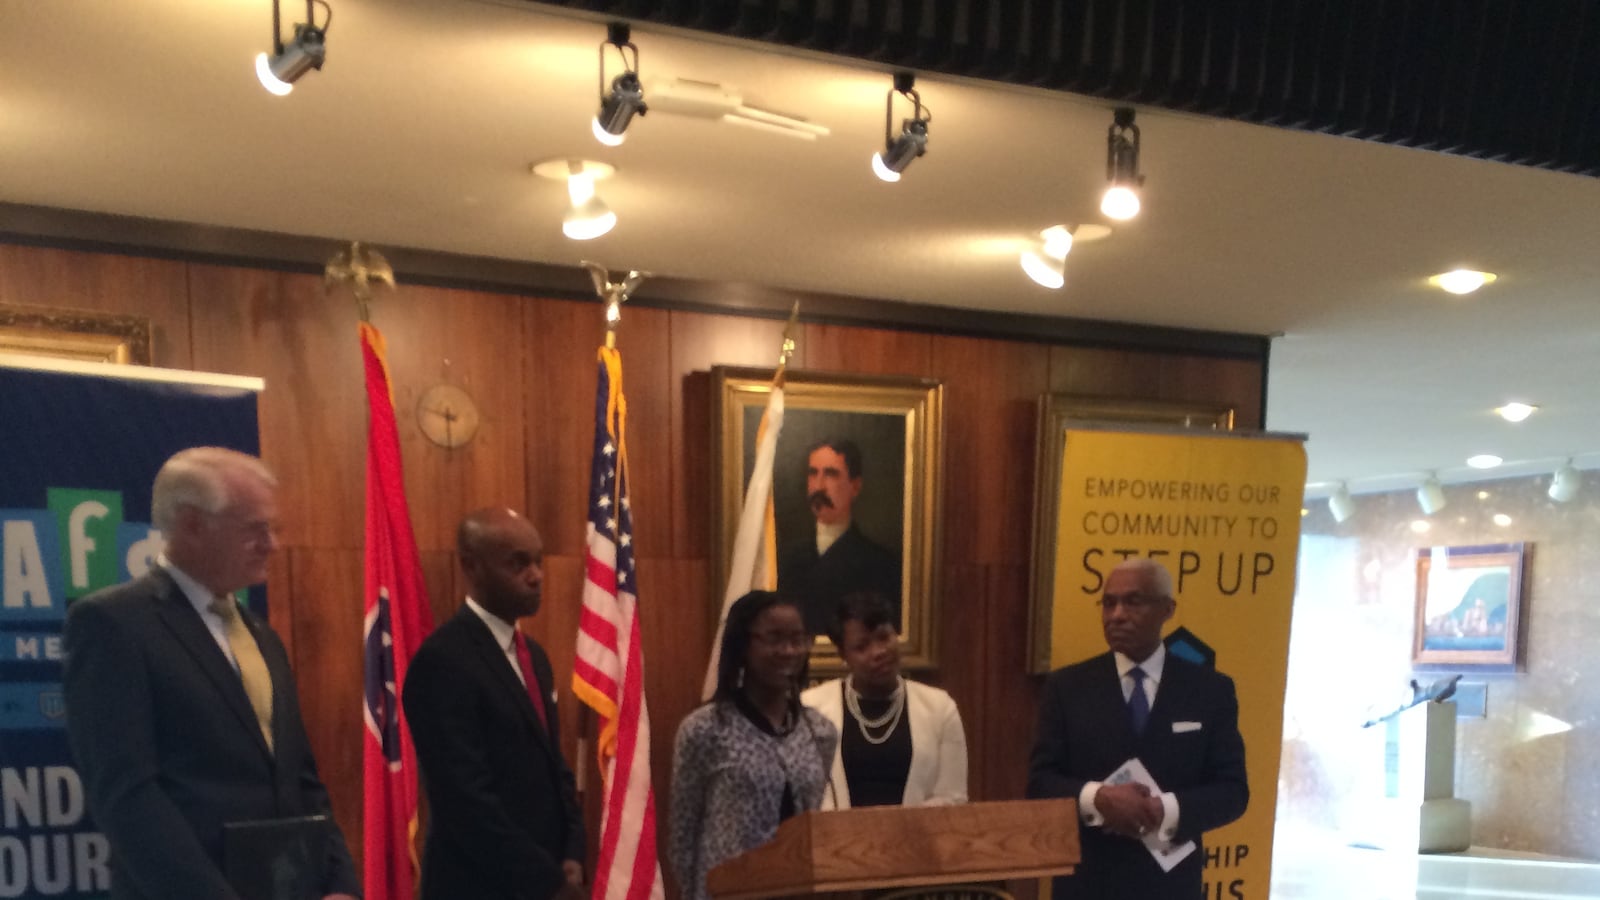 Carver High School student Kristen Tate, spoke at a press conference about filling out the FAFSA form.